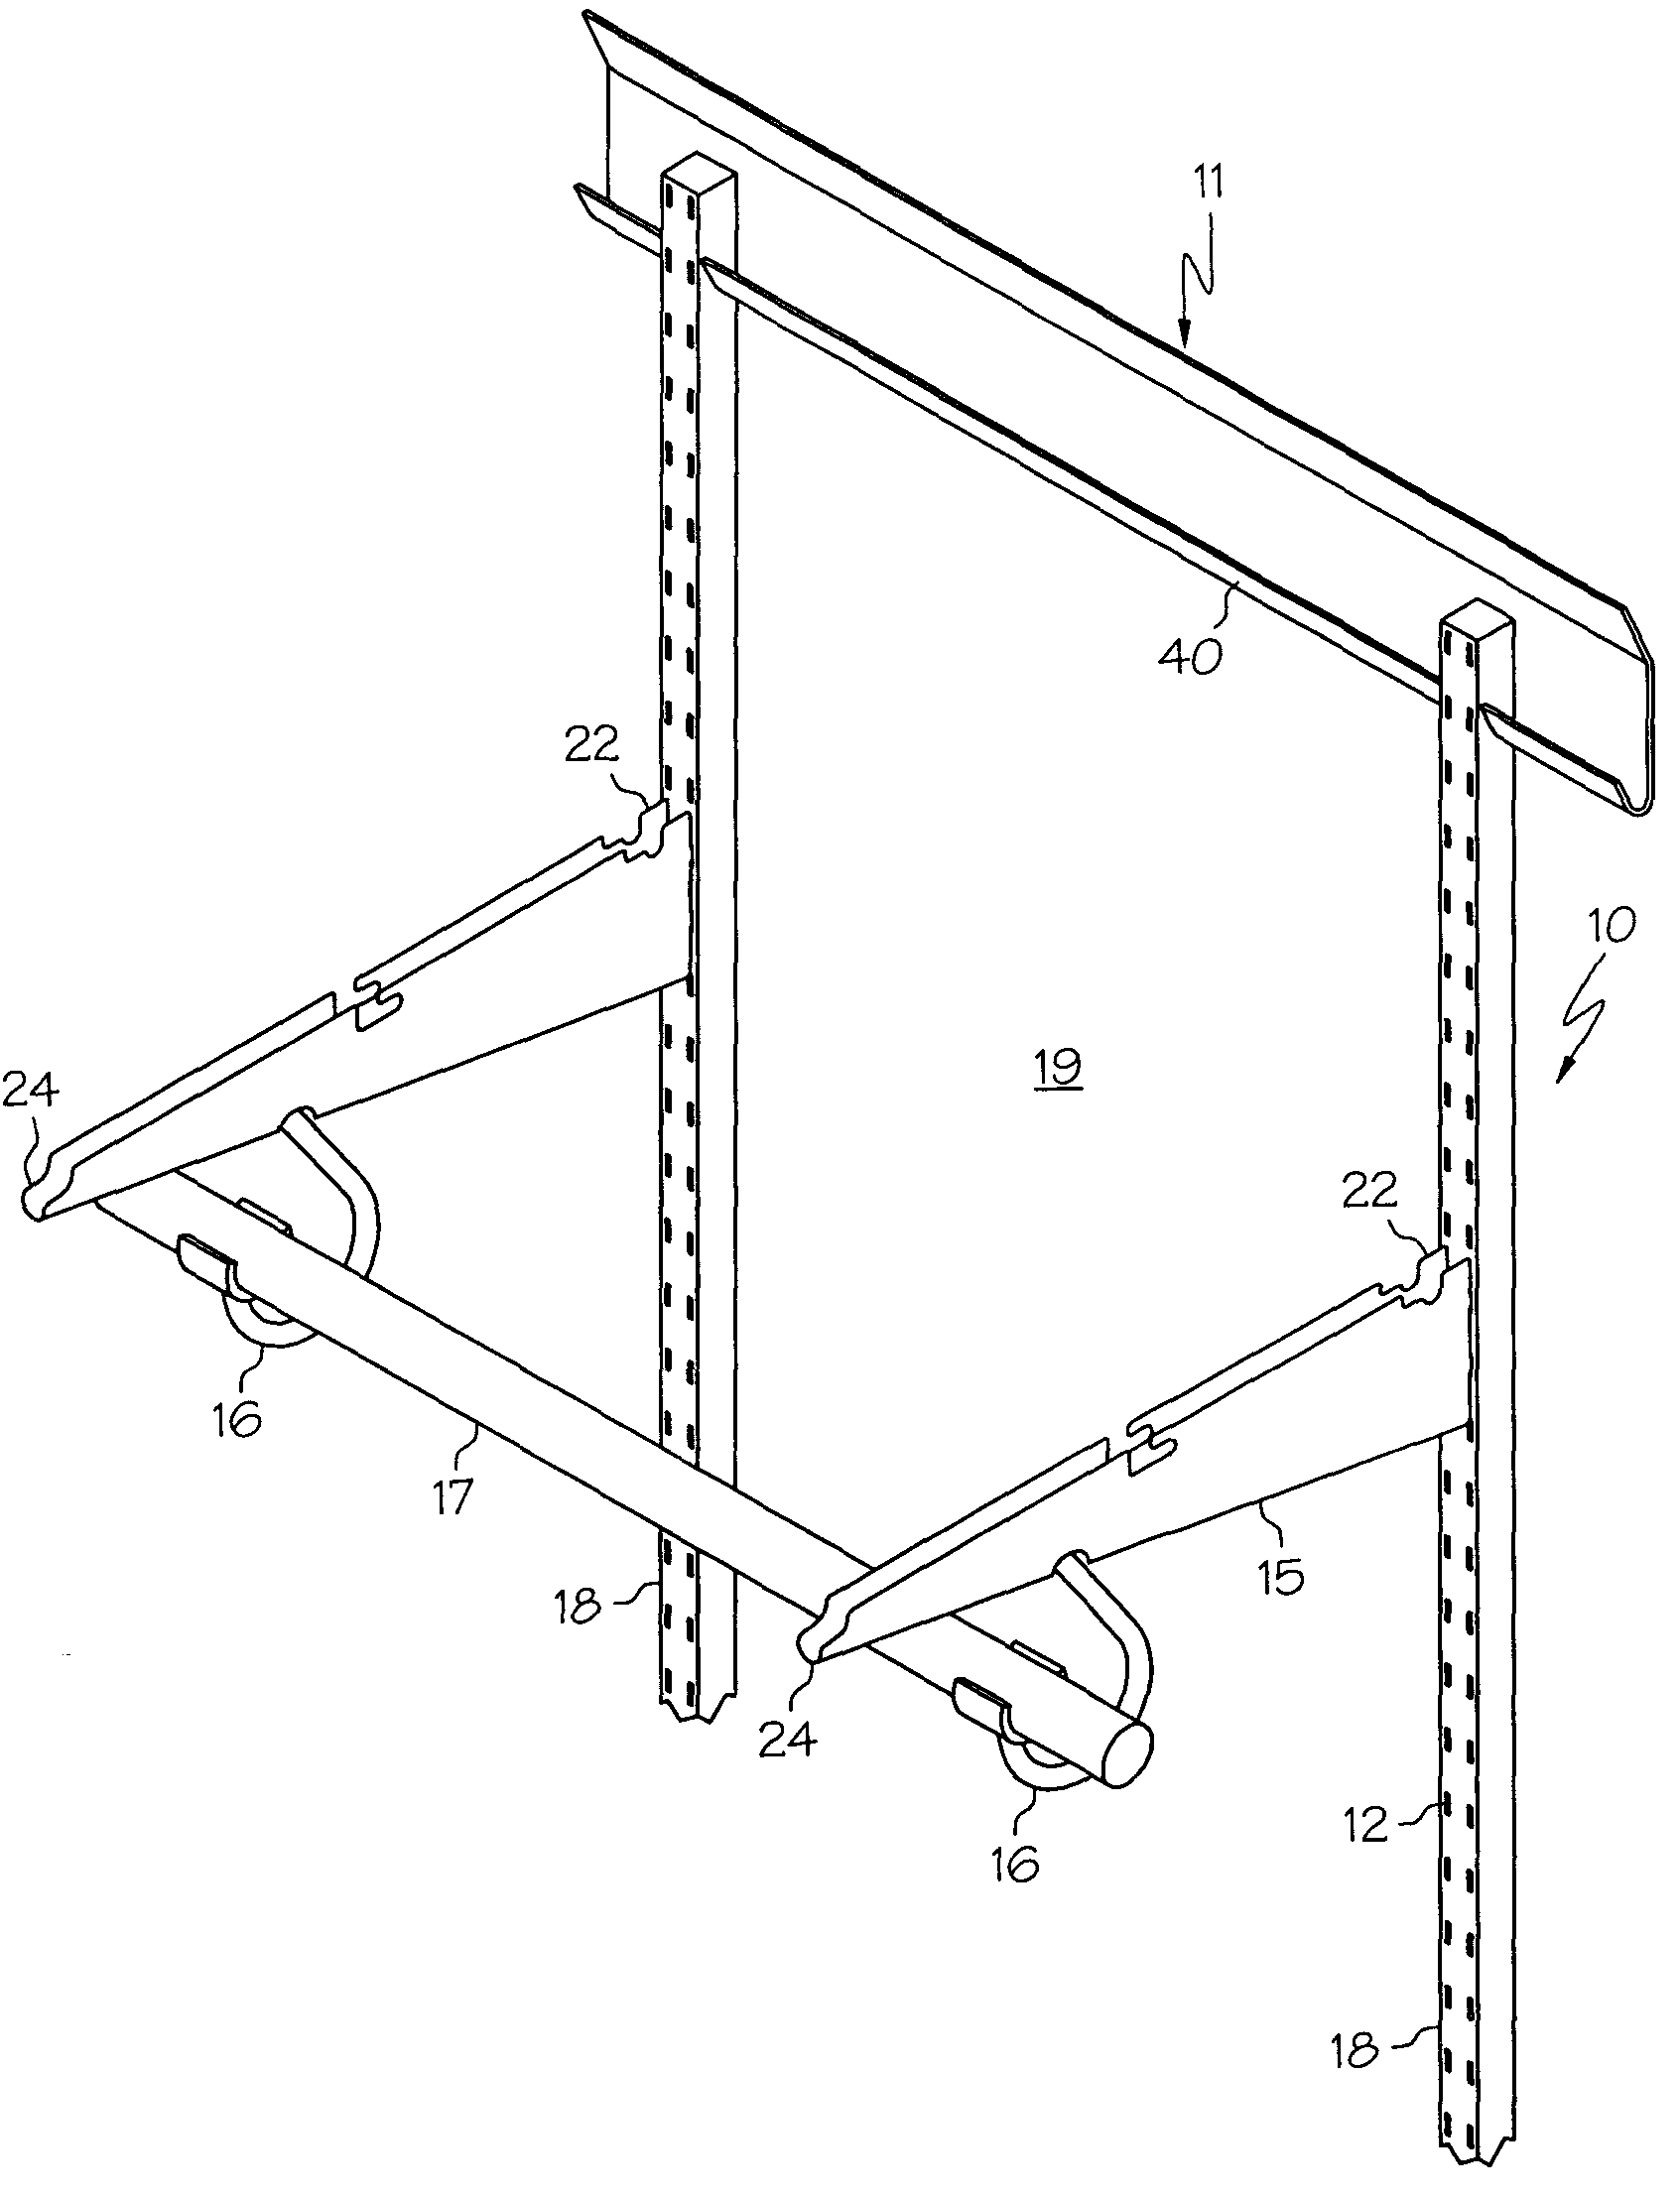 Support assembly for a hanger bar